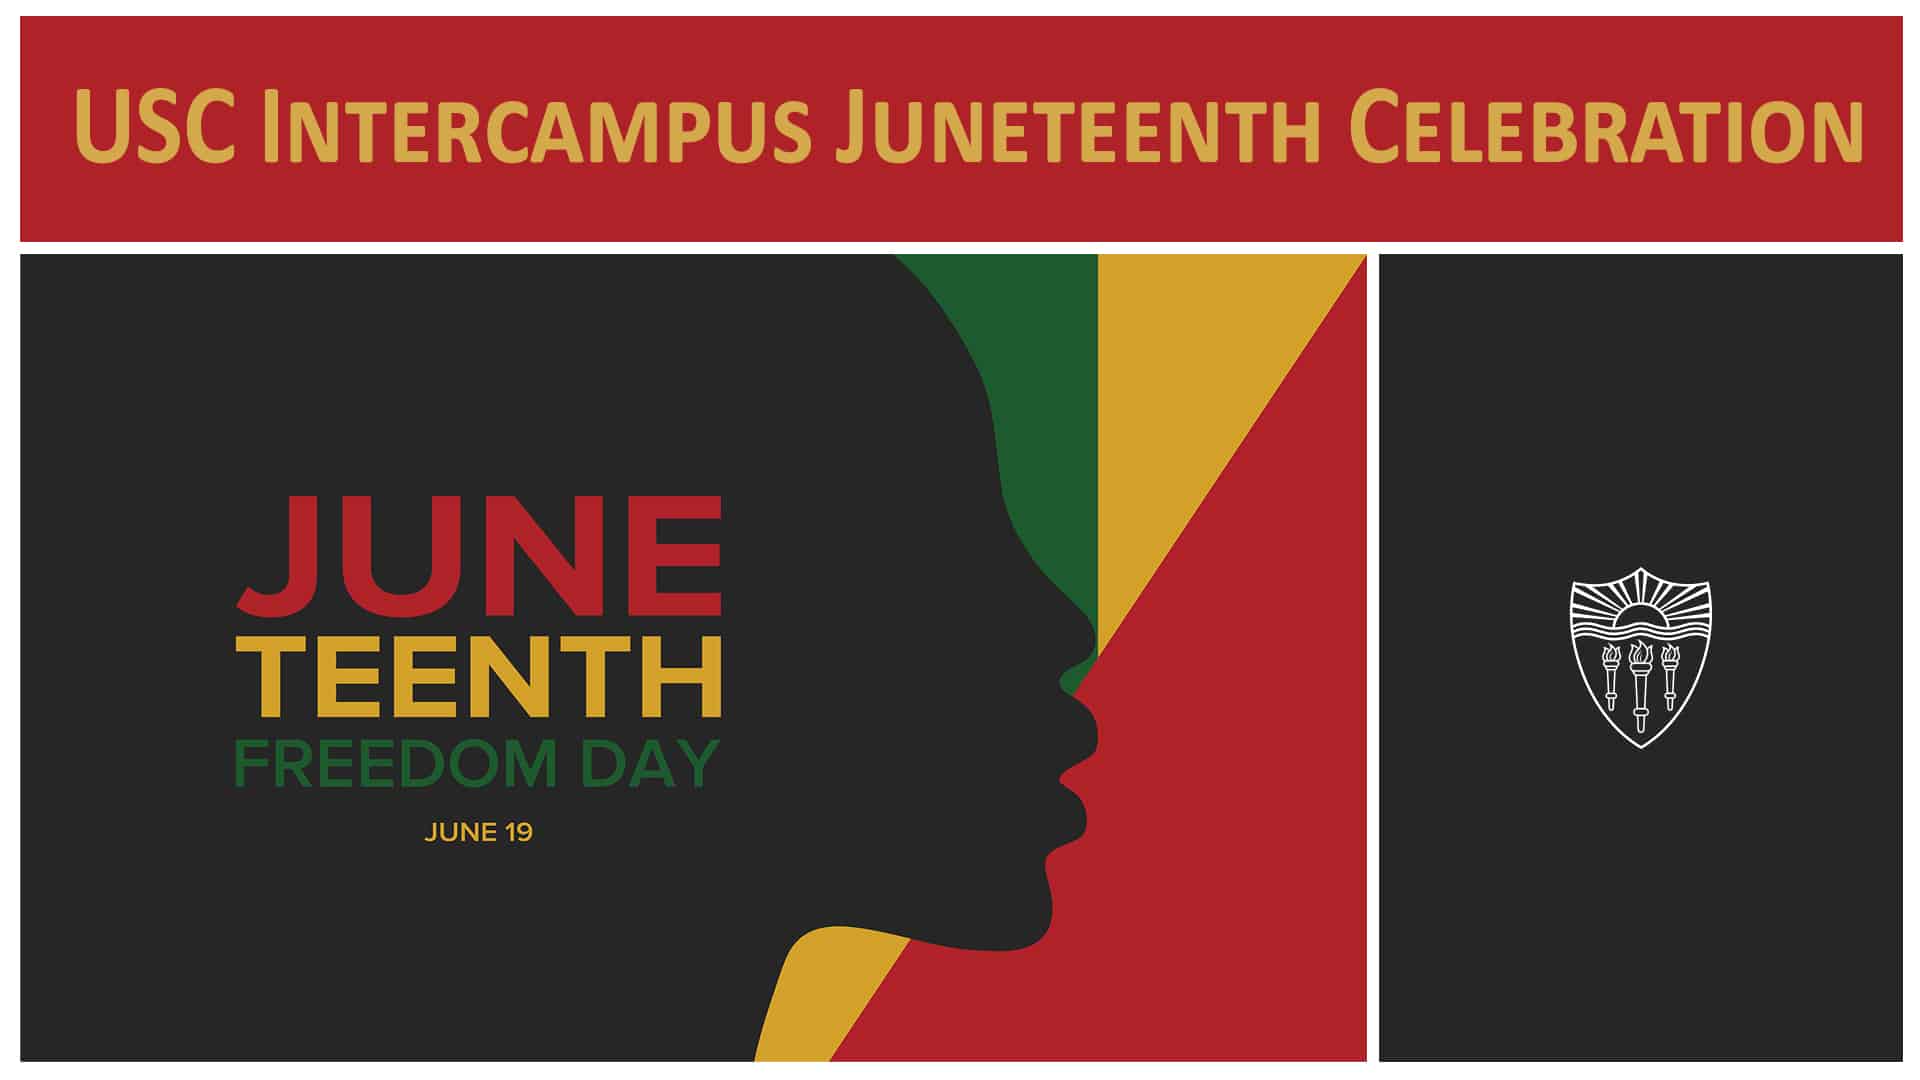 Featured image for “USC Intercampus Juneteenth Celebration”